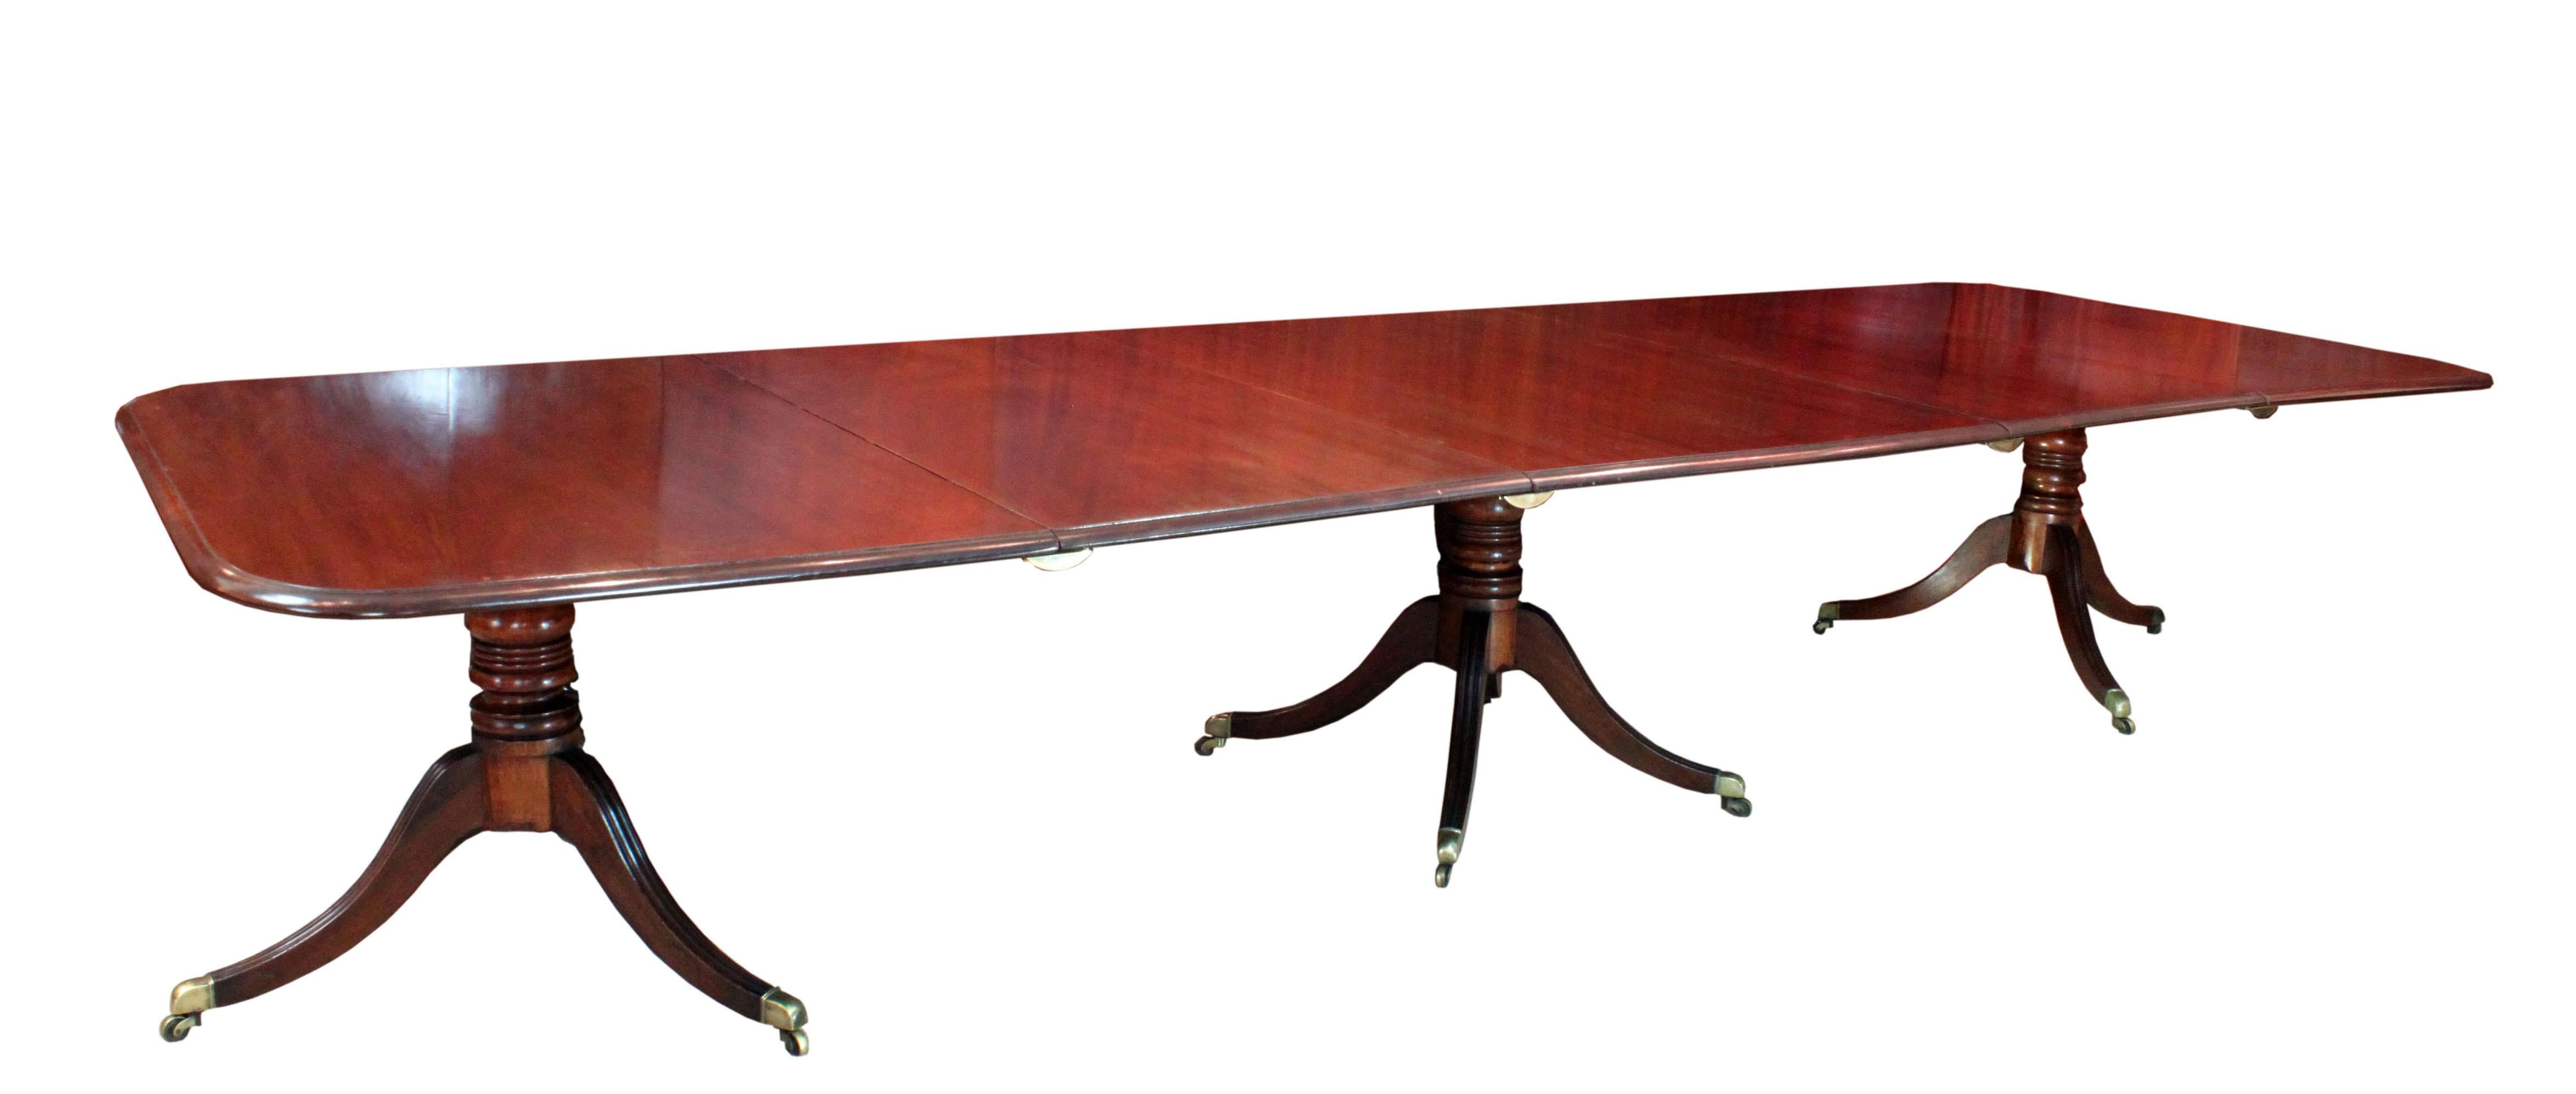 A fine Regency three pillar table in figured mahogany. Good model with generous sized tops, square ends and the combination of a four splay centre base and tripods at the ends making for comfortable seating. The bases with reeded sabre legs and